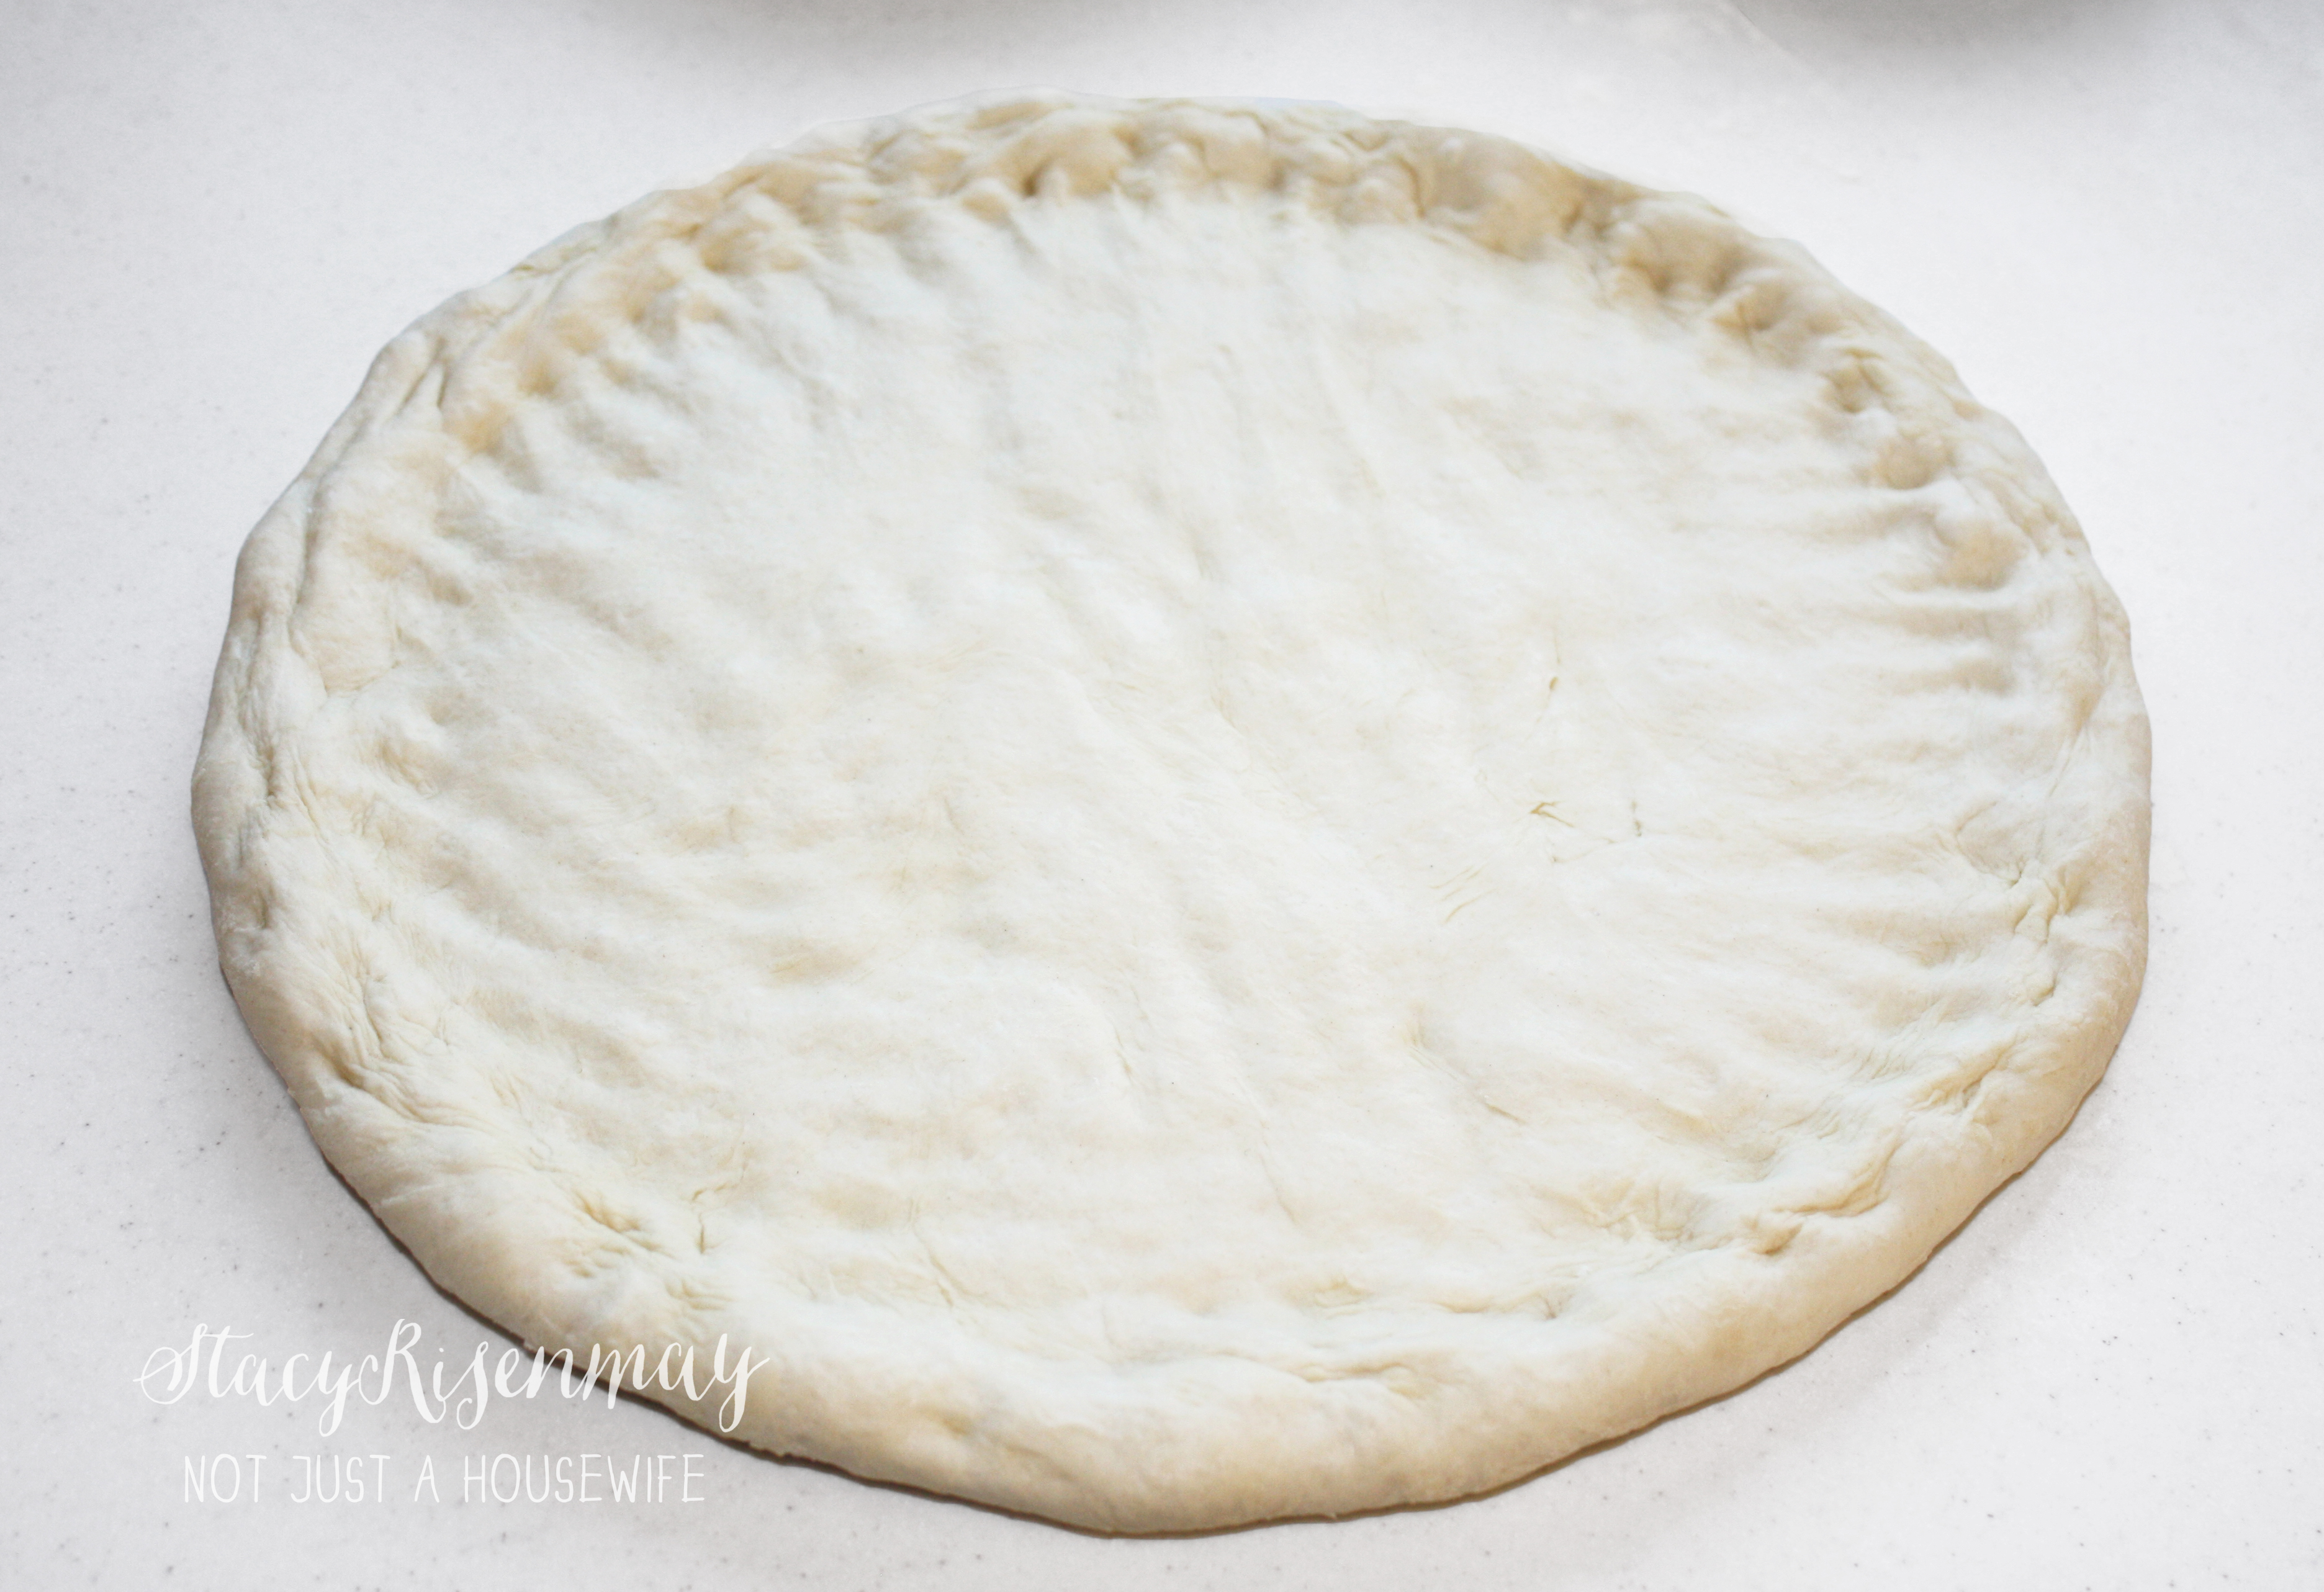 Super Easy Pizza Dough! - Stacy Risenmay